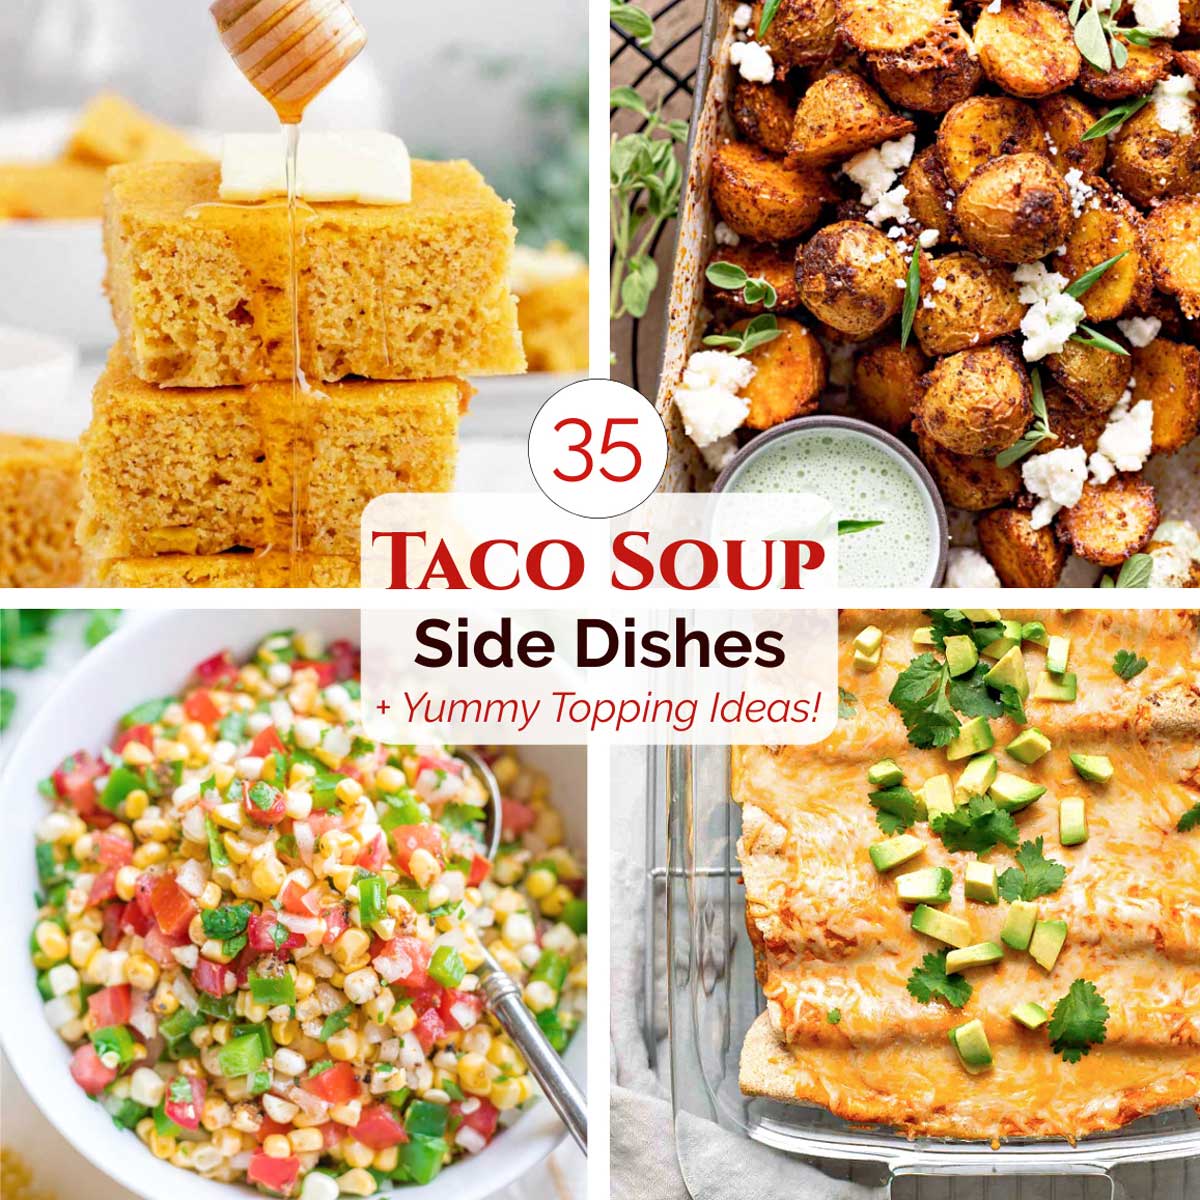 Square collage of four recipes with text "35 Taco Soup Side Dishes + Yummy Topping Ideas!".